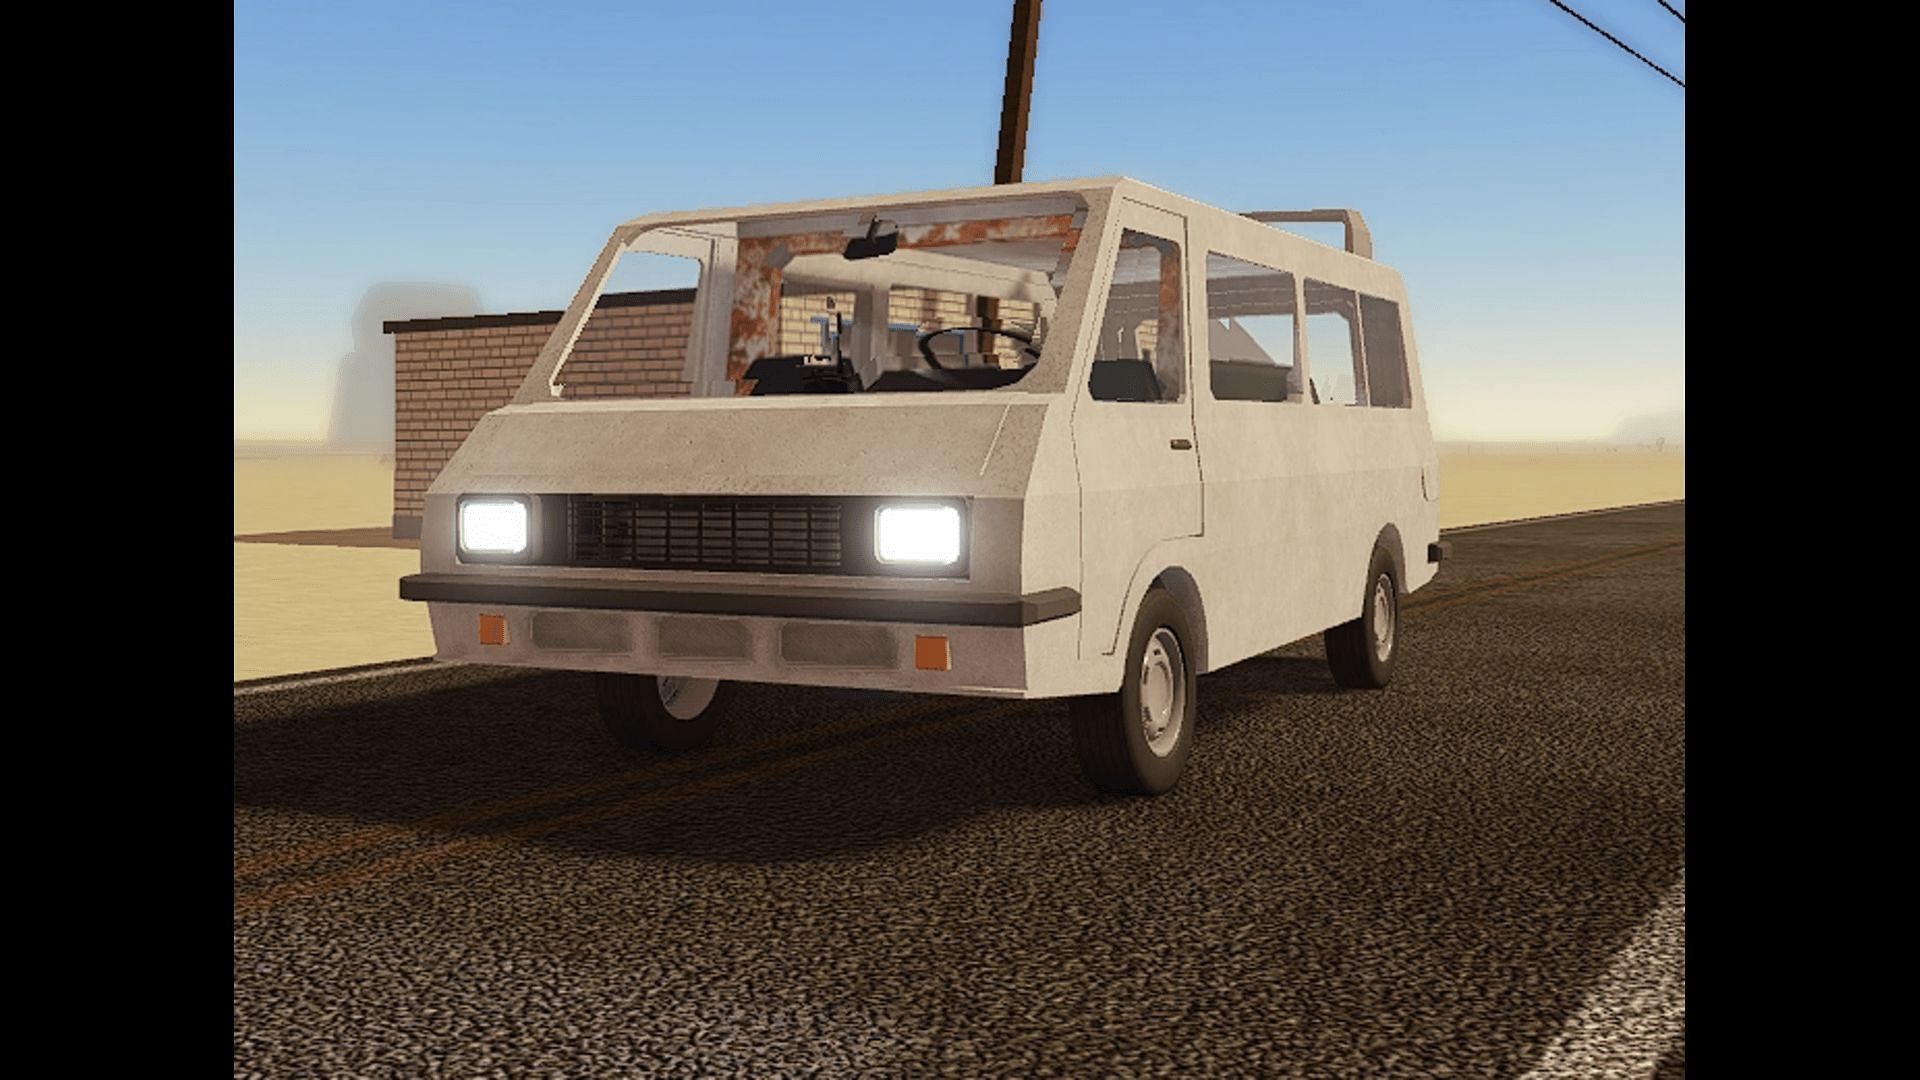 Cruise the roads in A Dusty Trip inside the Van (Image via Roblox)